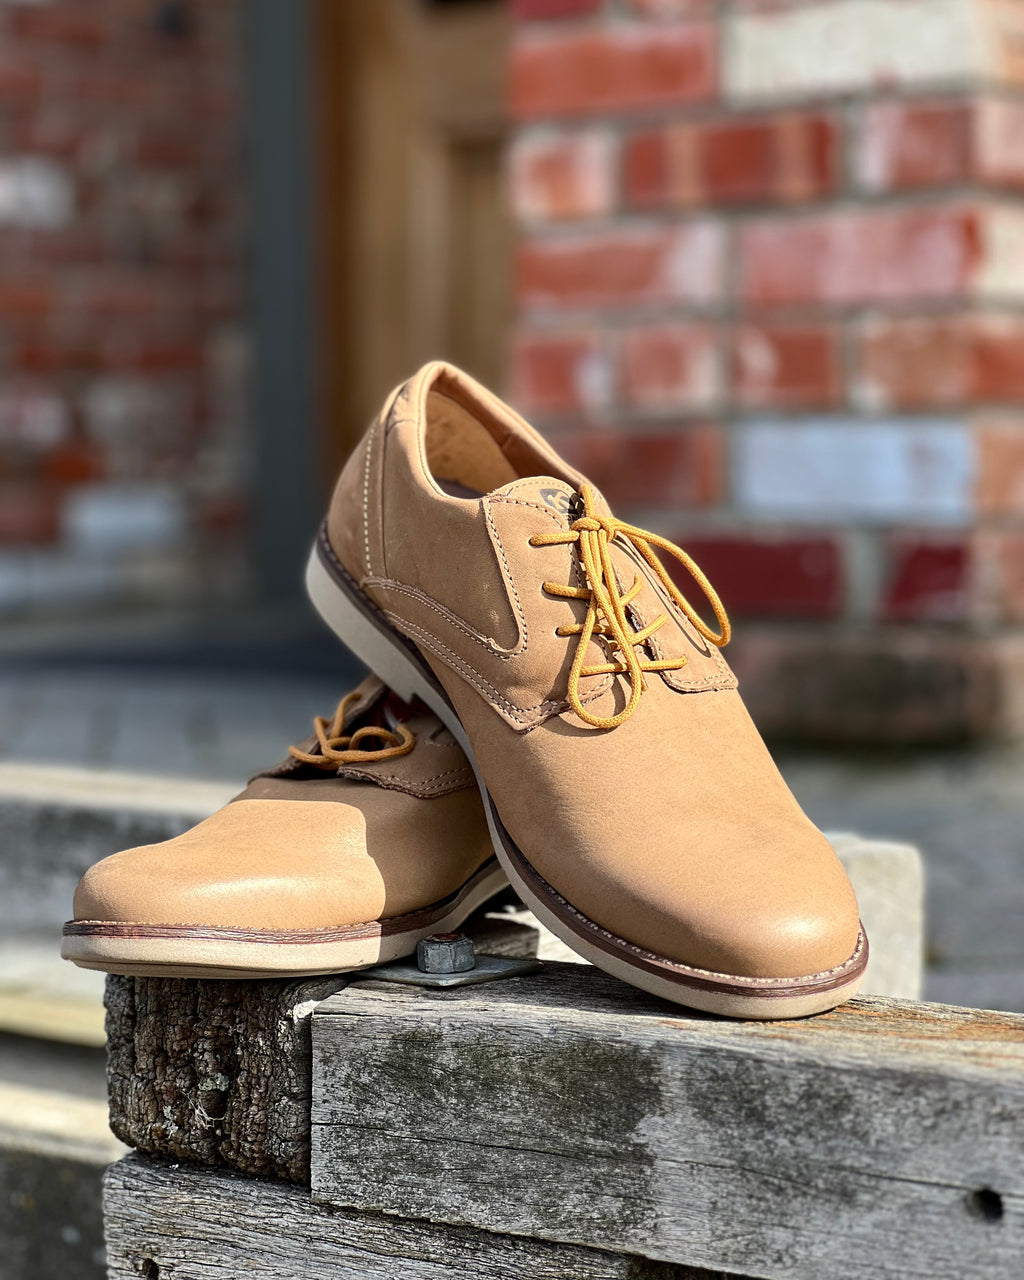 Leather lace-up shoes for men by Kildare